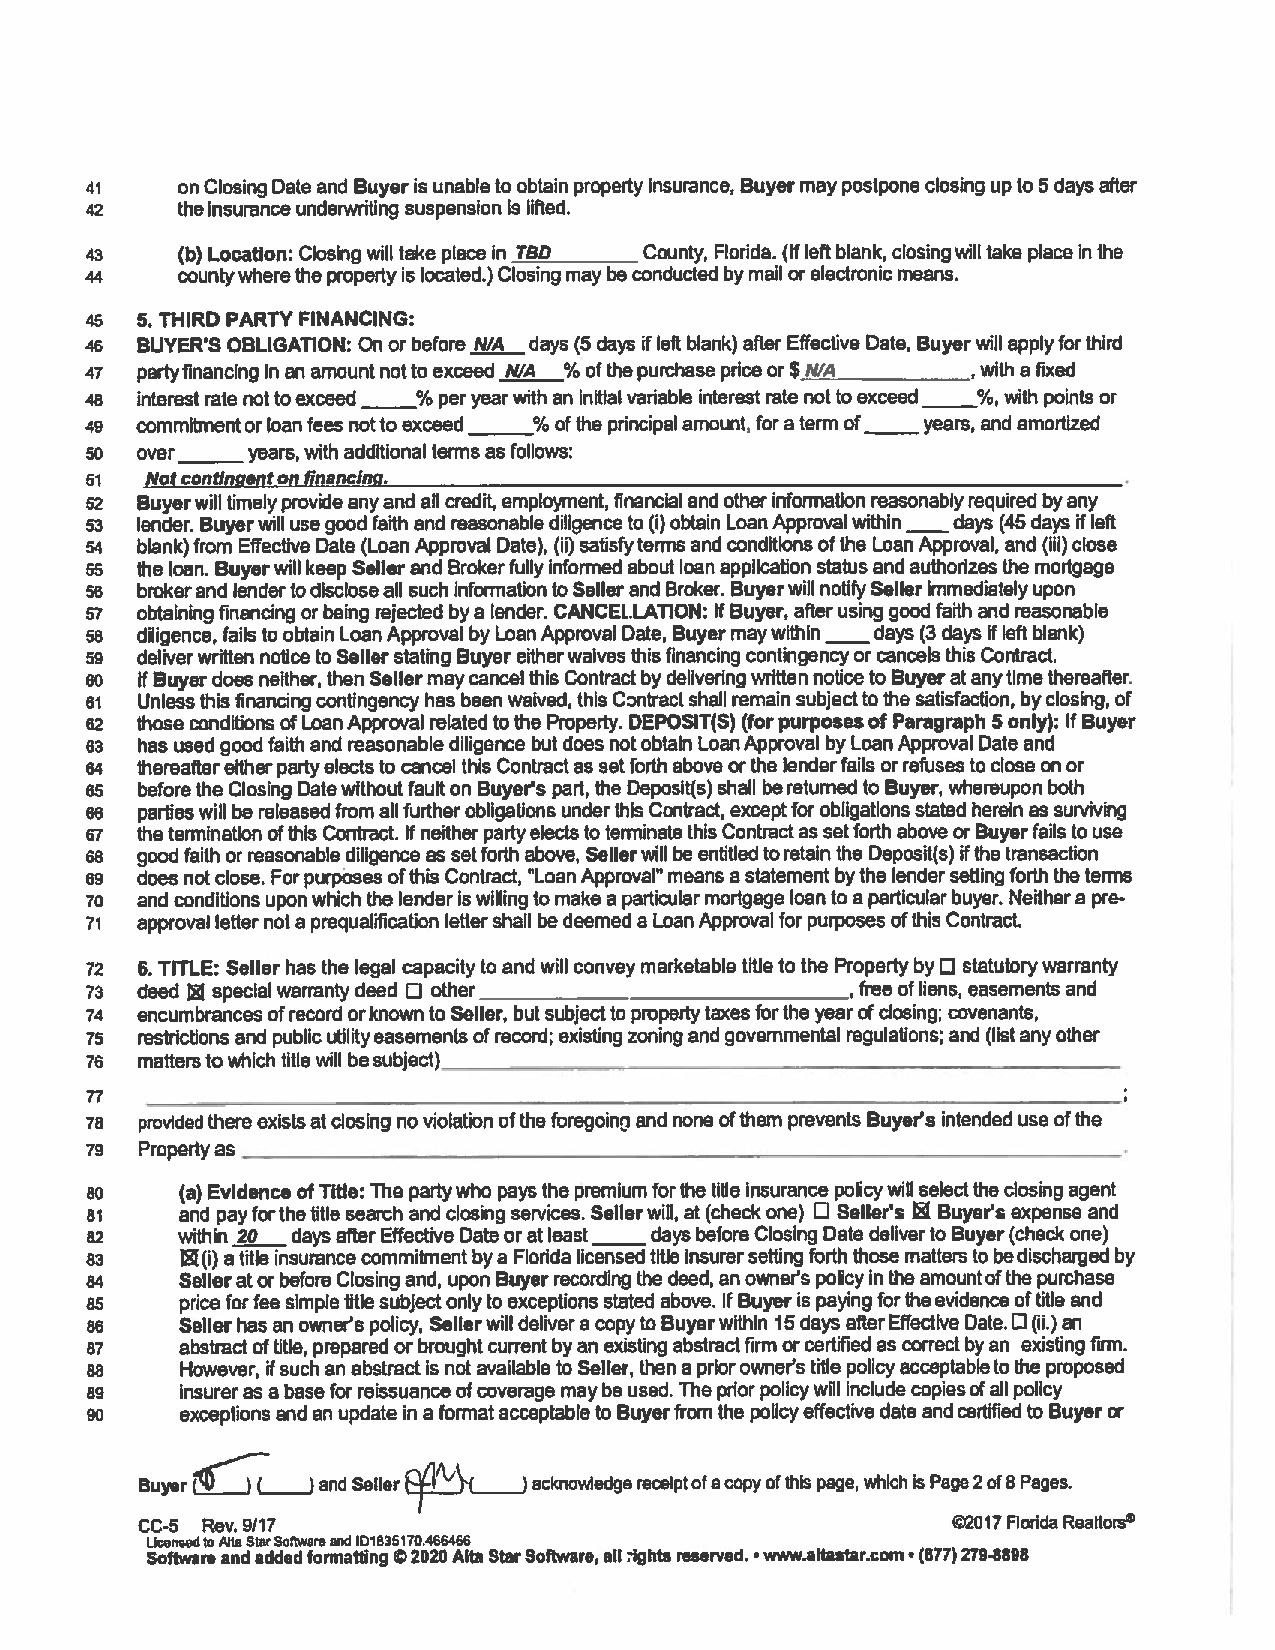 Ex 10 1 2 F10q0620ex10 1 Legacy Htm Commercial Contract Dated July 24 2020 By And Between Daniel Thom As Trustee Of Torstonbo Trust And 1612 E Cape Coral Parkway Holding Co Llc Exhibit